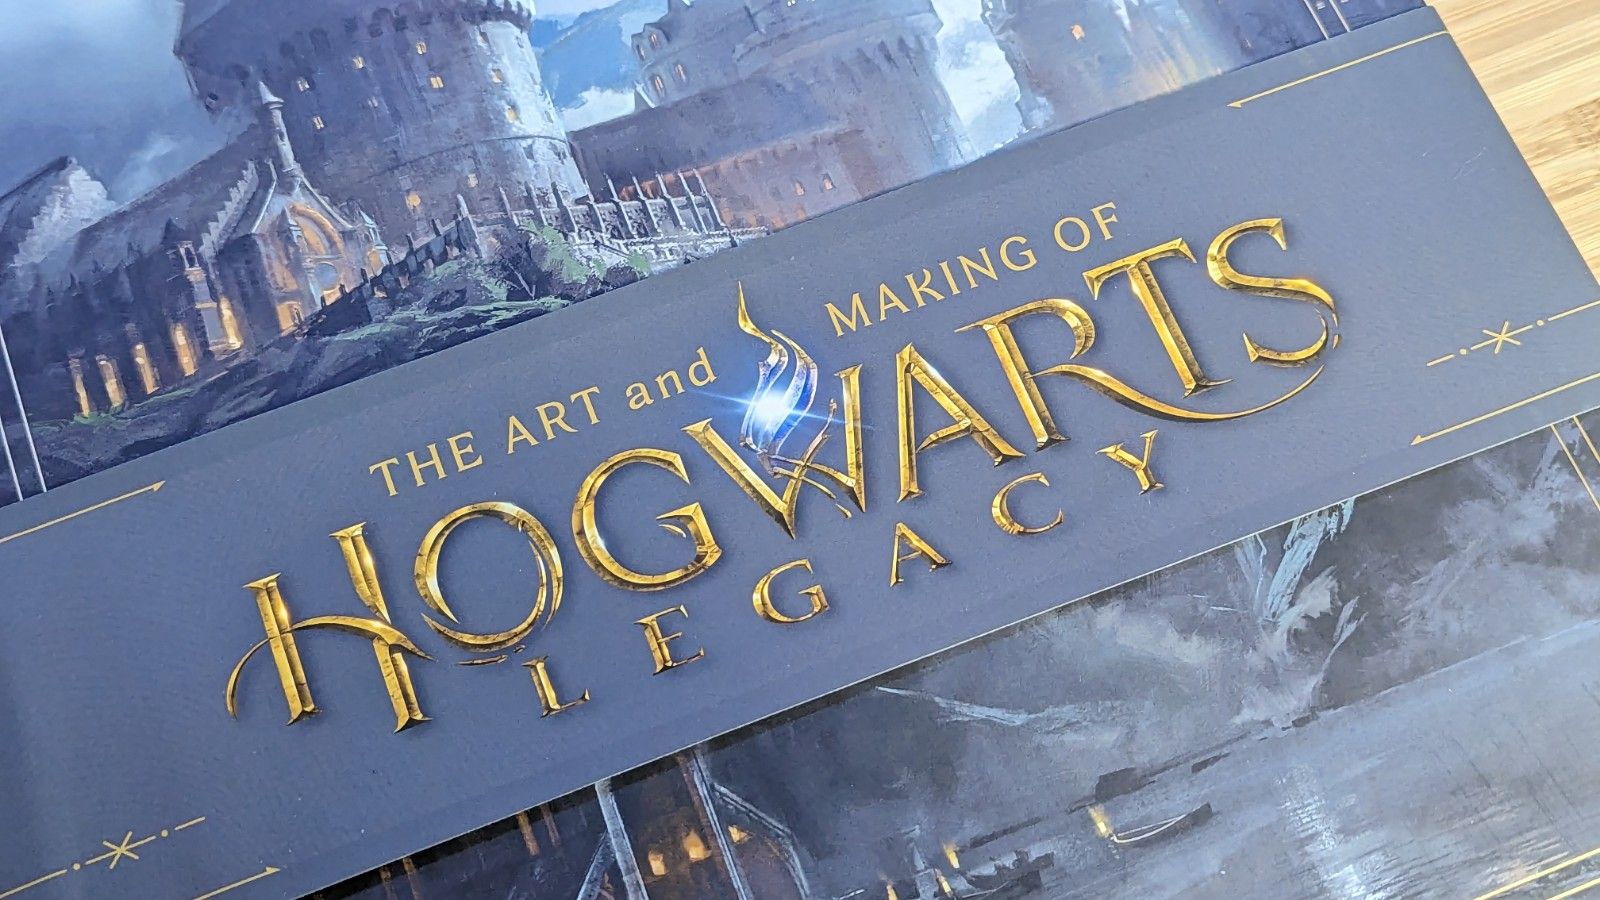 Hogwarts Legacy PS4 Gameplay - MIGHT ACTUALLY SURPRISE YOU